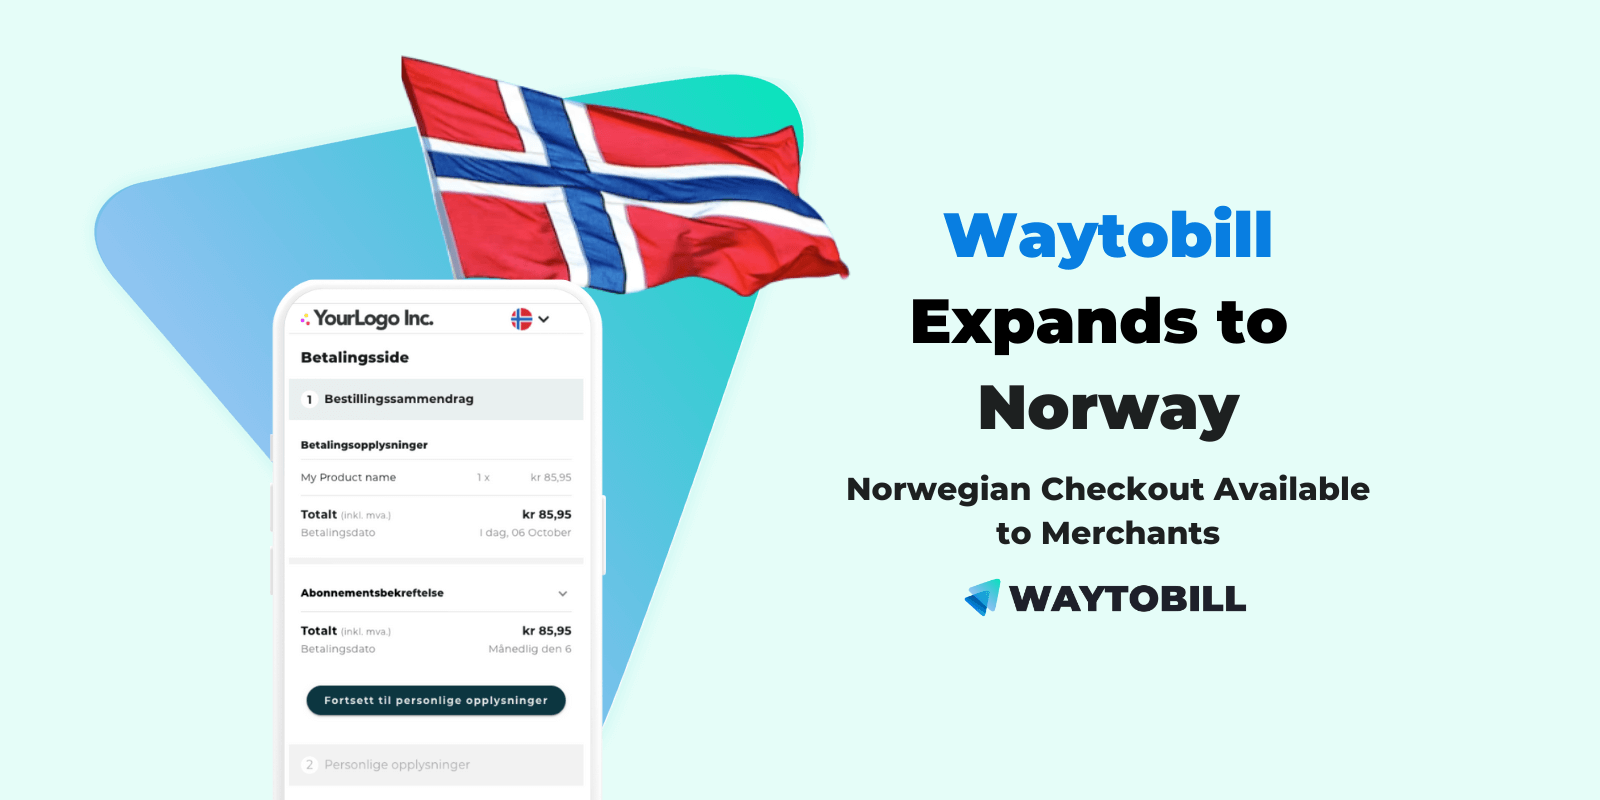 Waytobill Expands to Norway and Offers Innovative Payment Methods